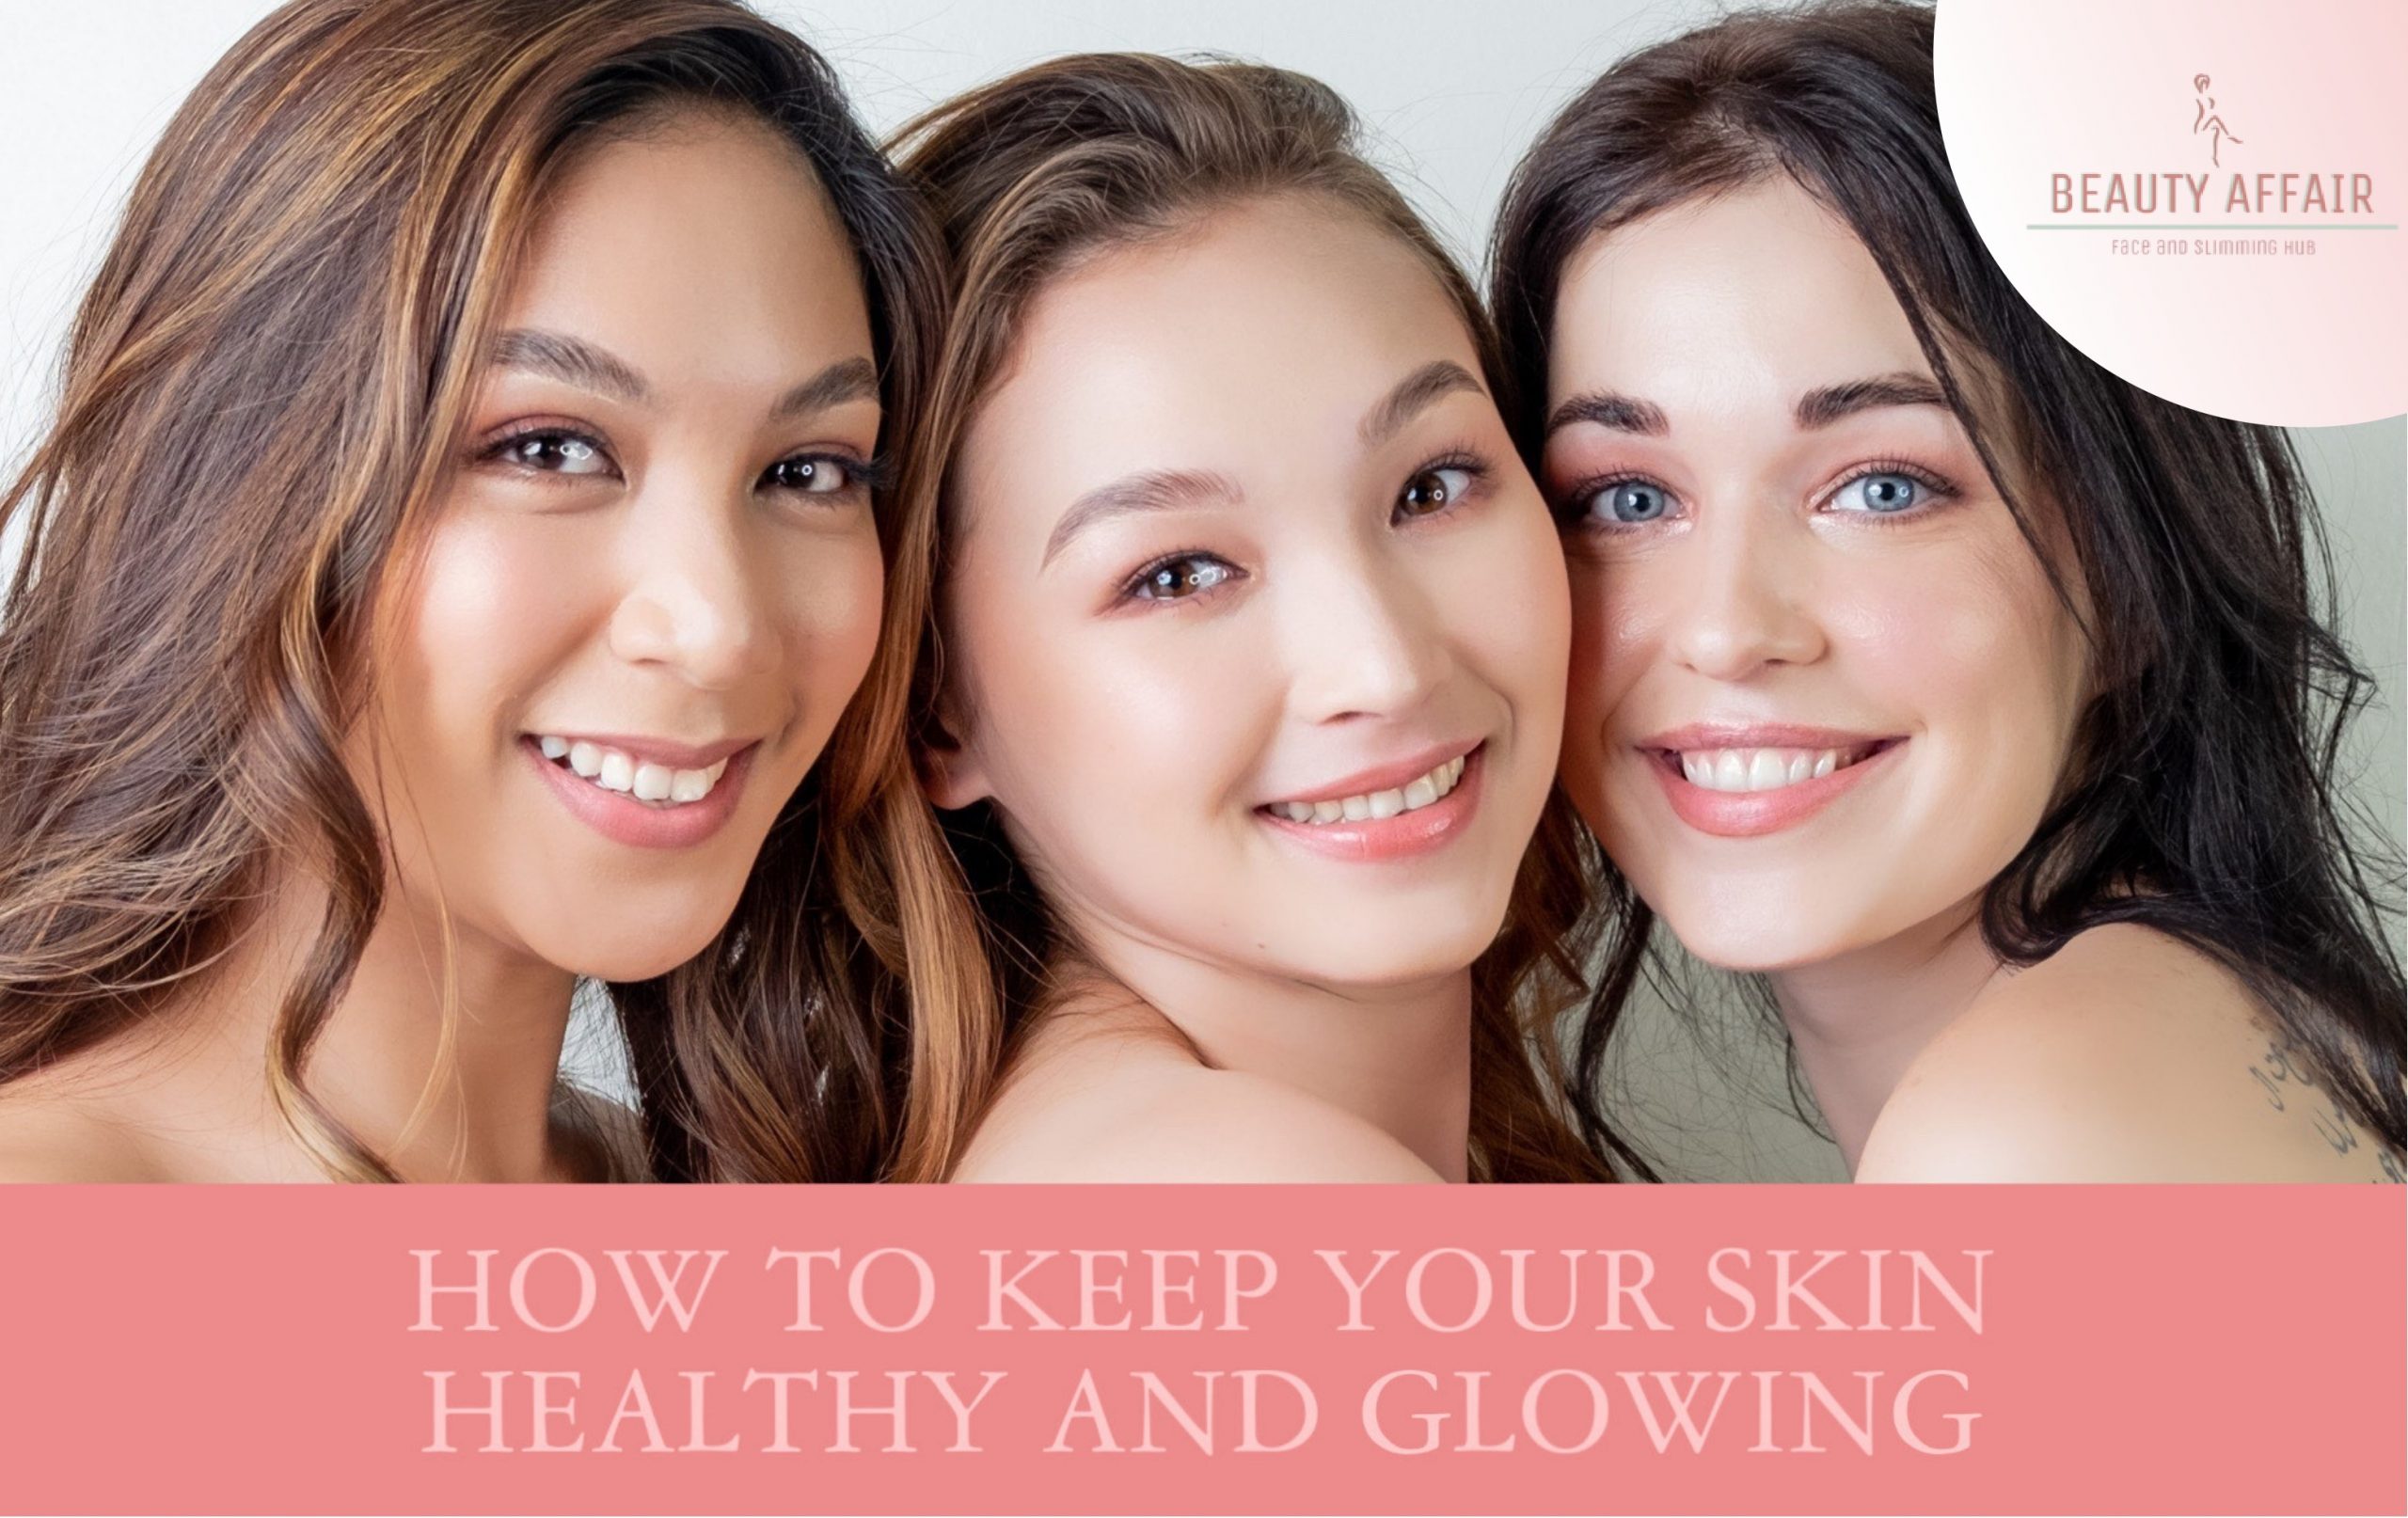 How To Keep Your Skin Healthy and Glowing